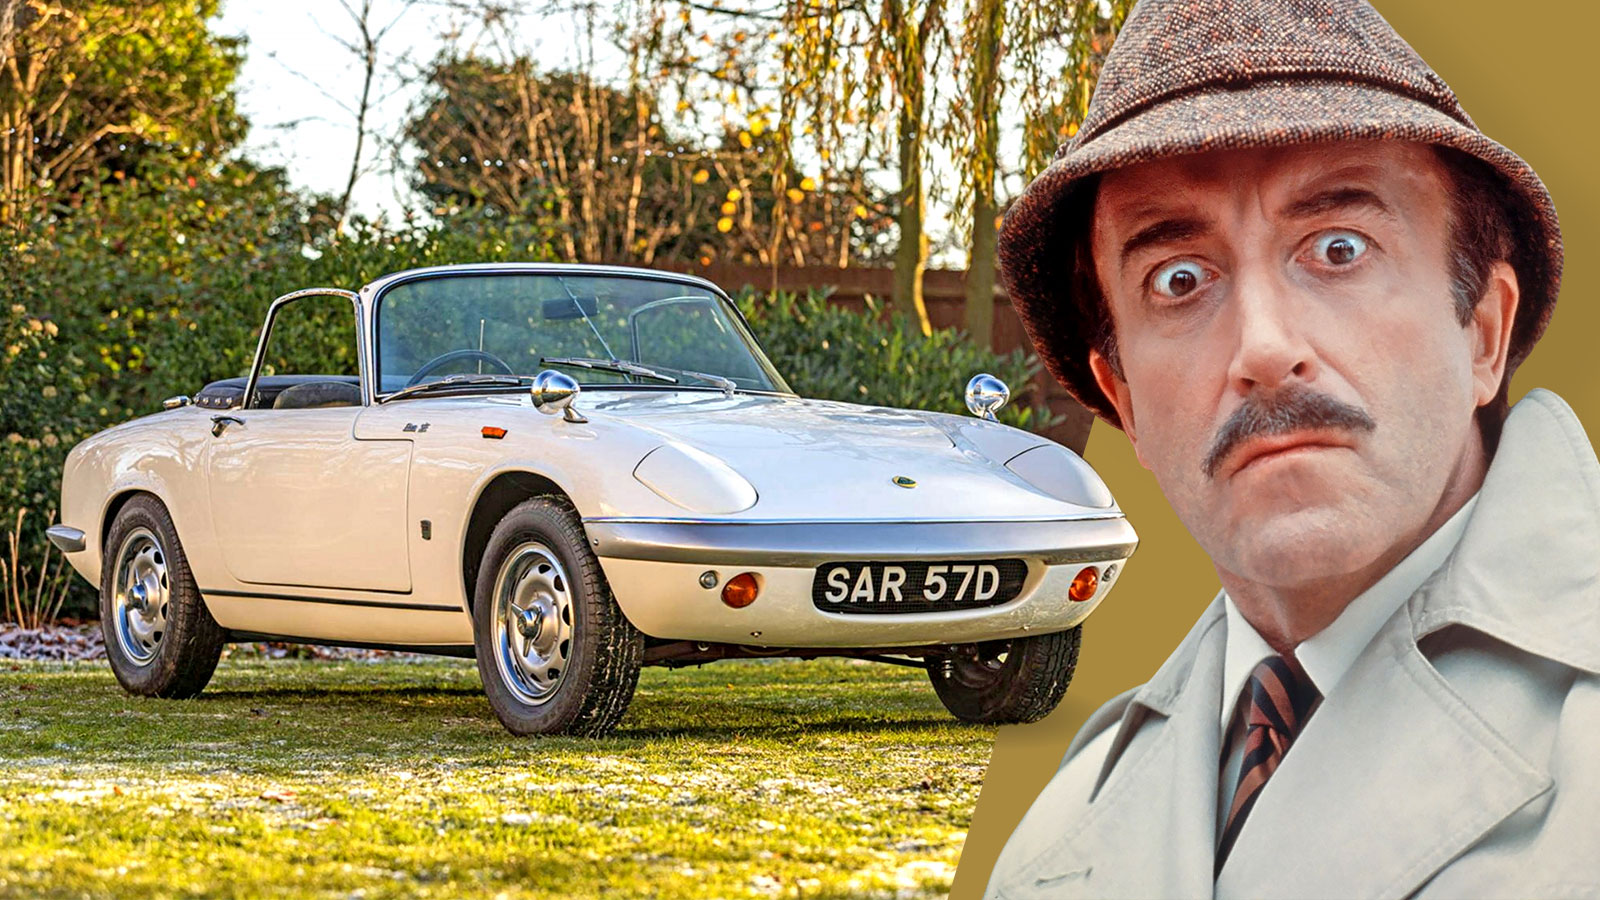 Peter Sellers Lotus Elan for sale at auction